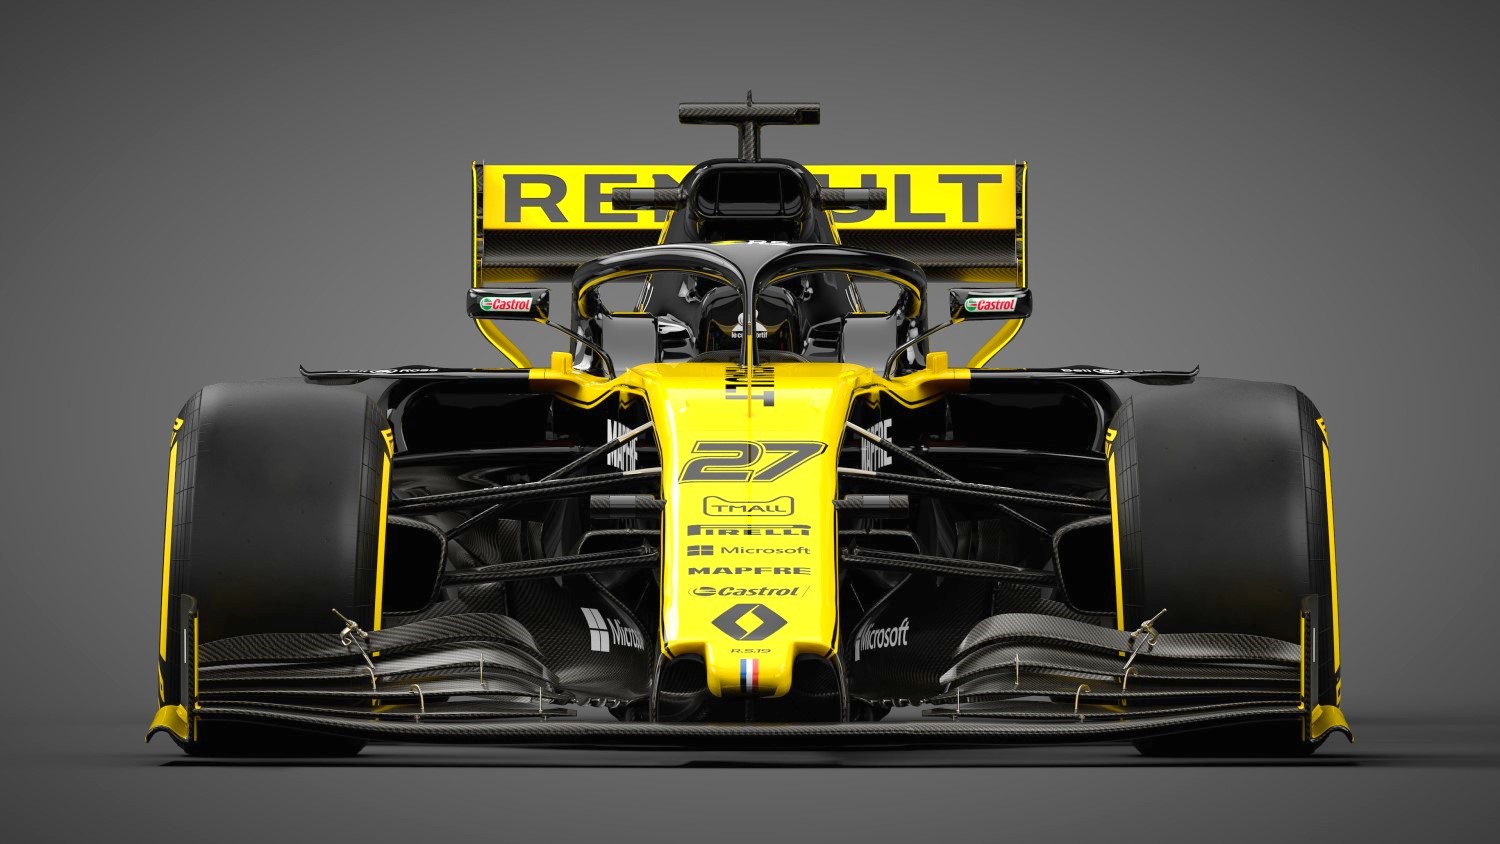 Is Renault cheating?